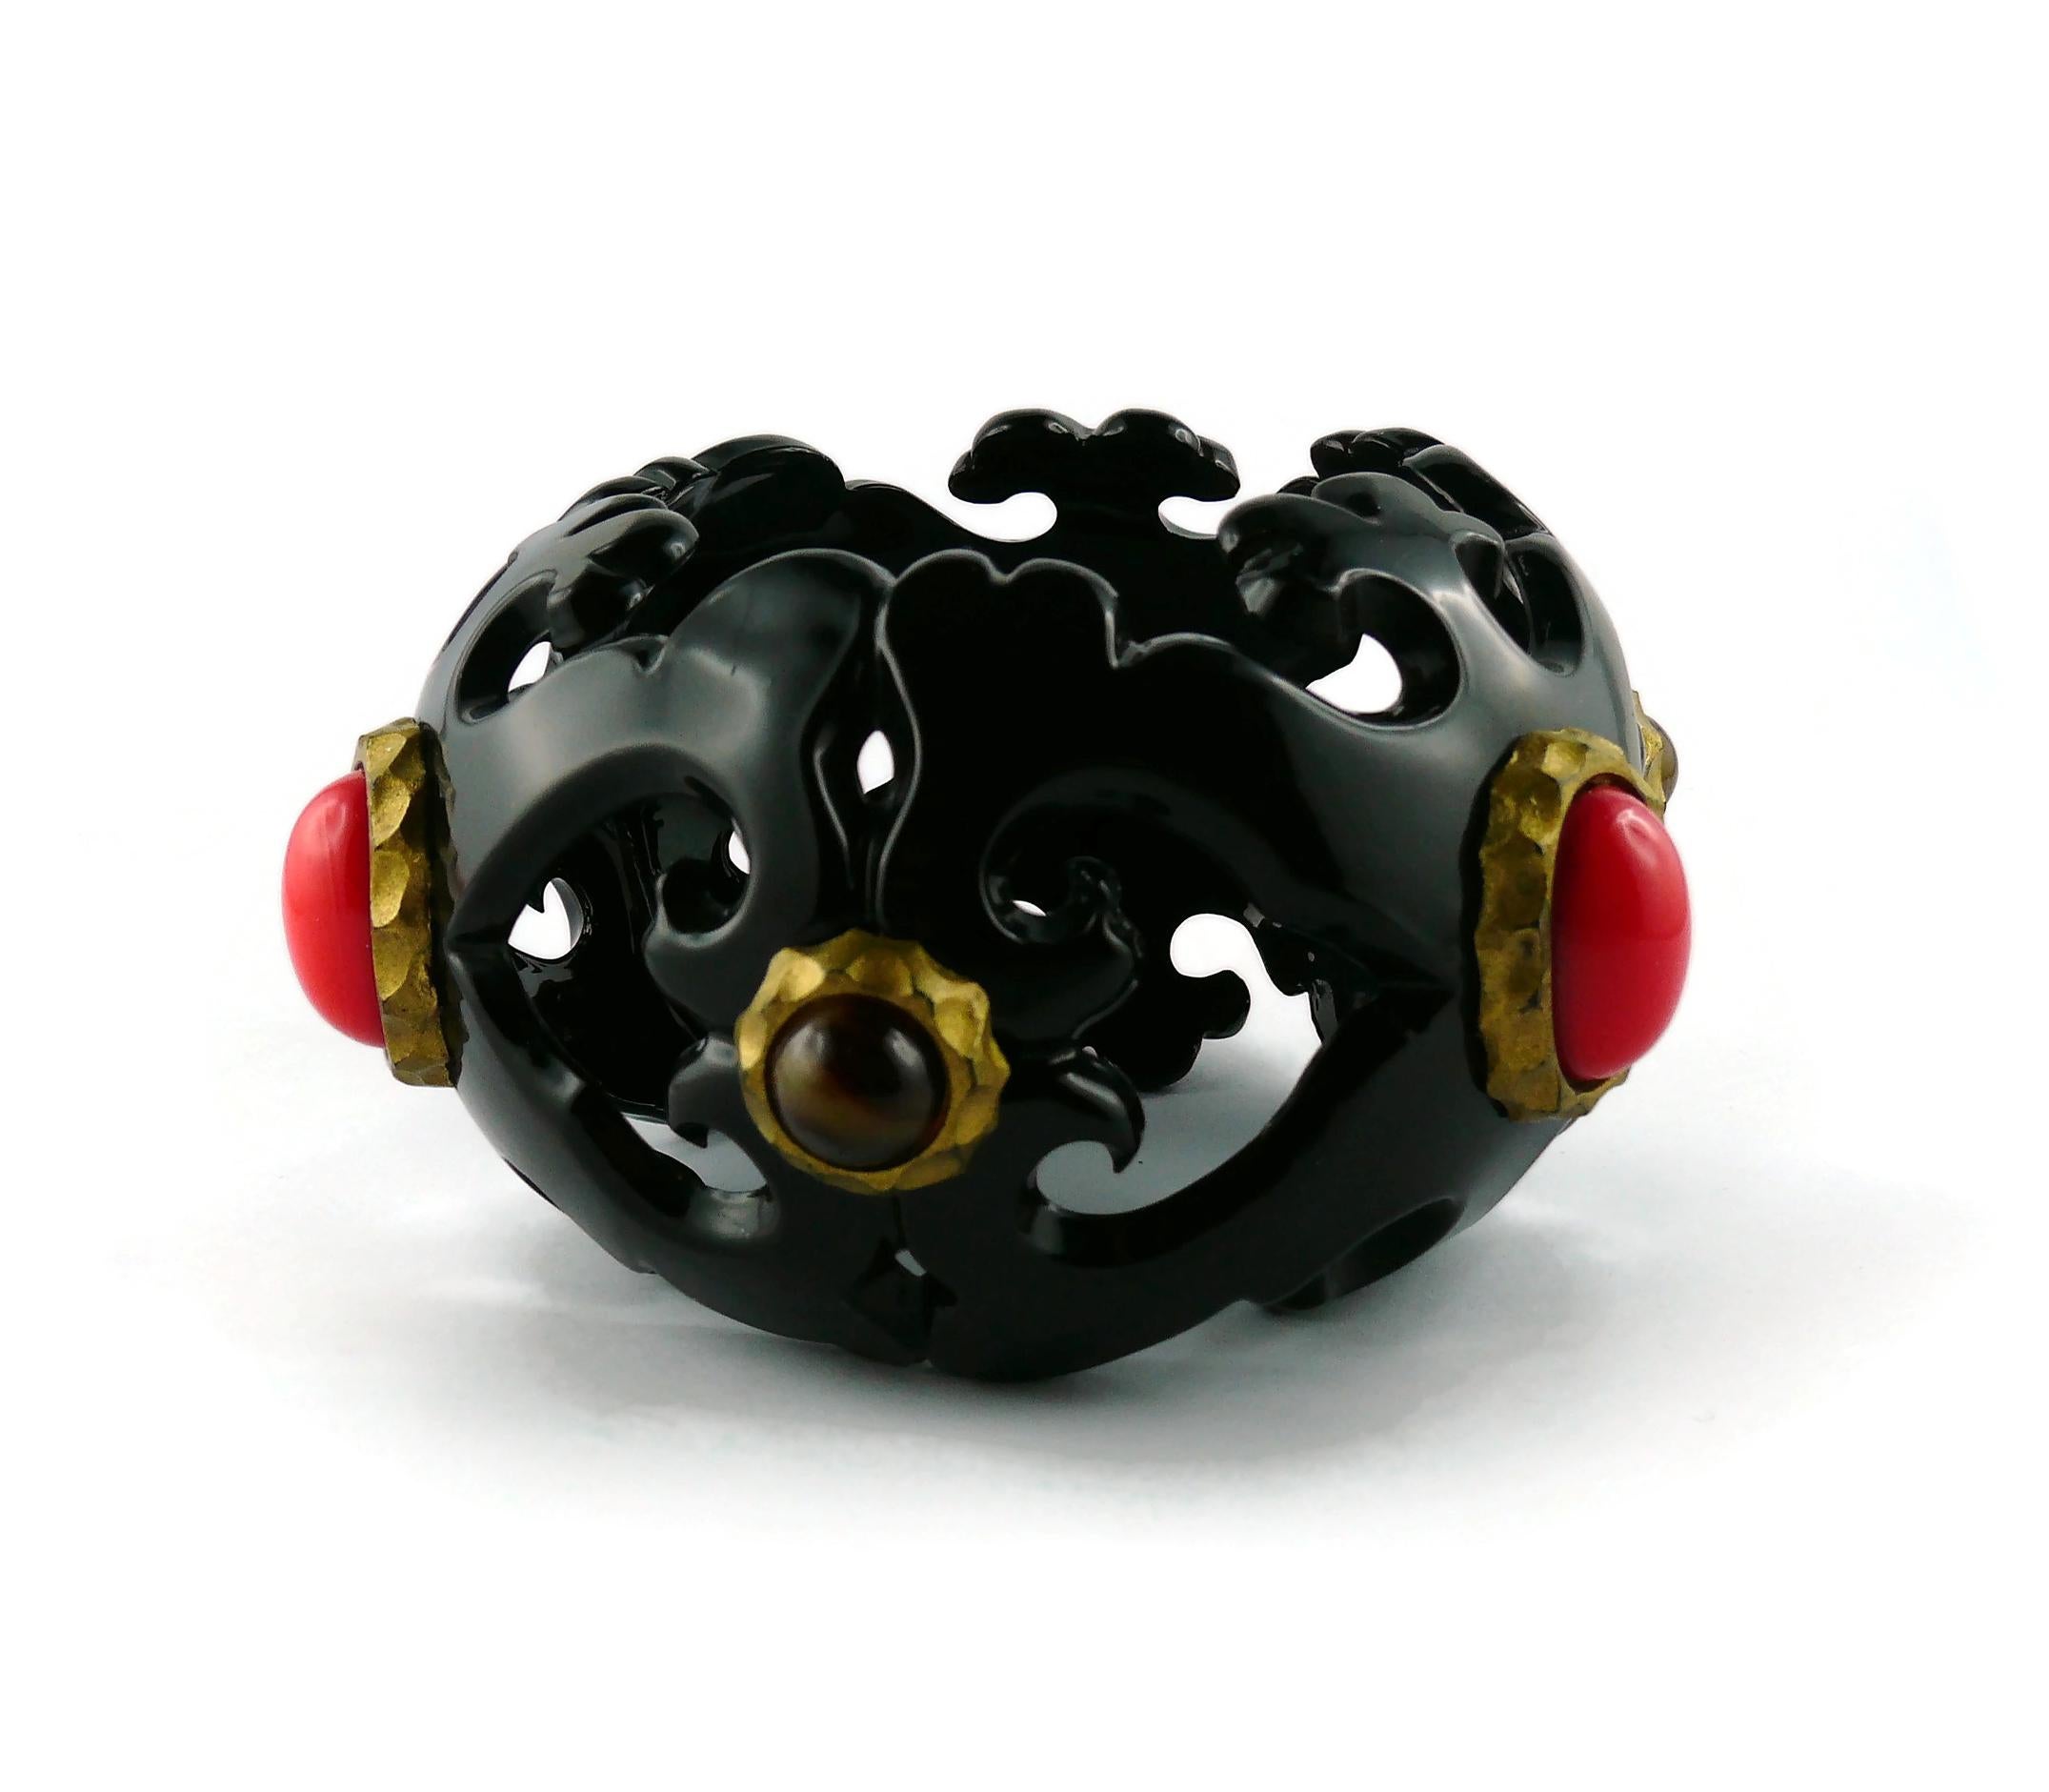 CHRISTIAN LACROIX rare vintage massive black resin cuff bracelet featuring a gorgeous openwork design of scrolls and hearts embellished with faux tiger eye stones and faux red coral resin cabochons.

Marked CHRISTIAN LACROIX CL Made in